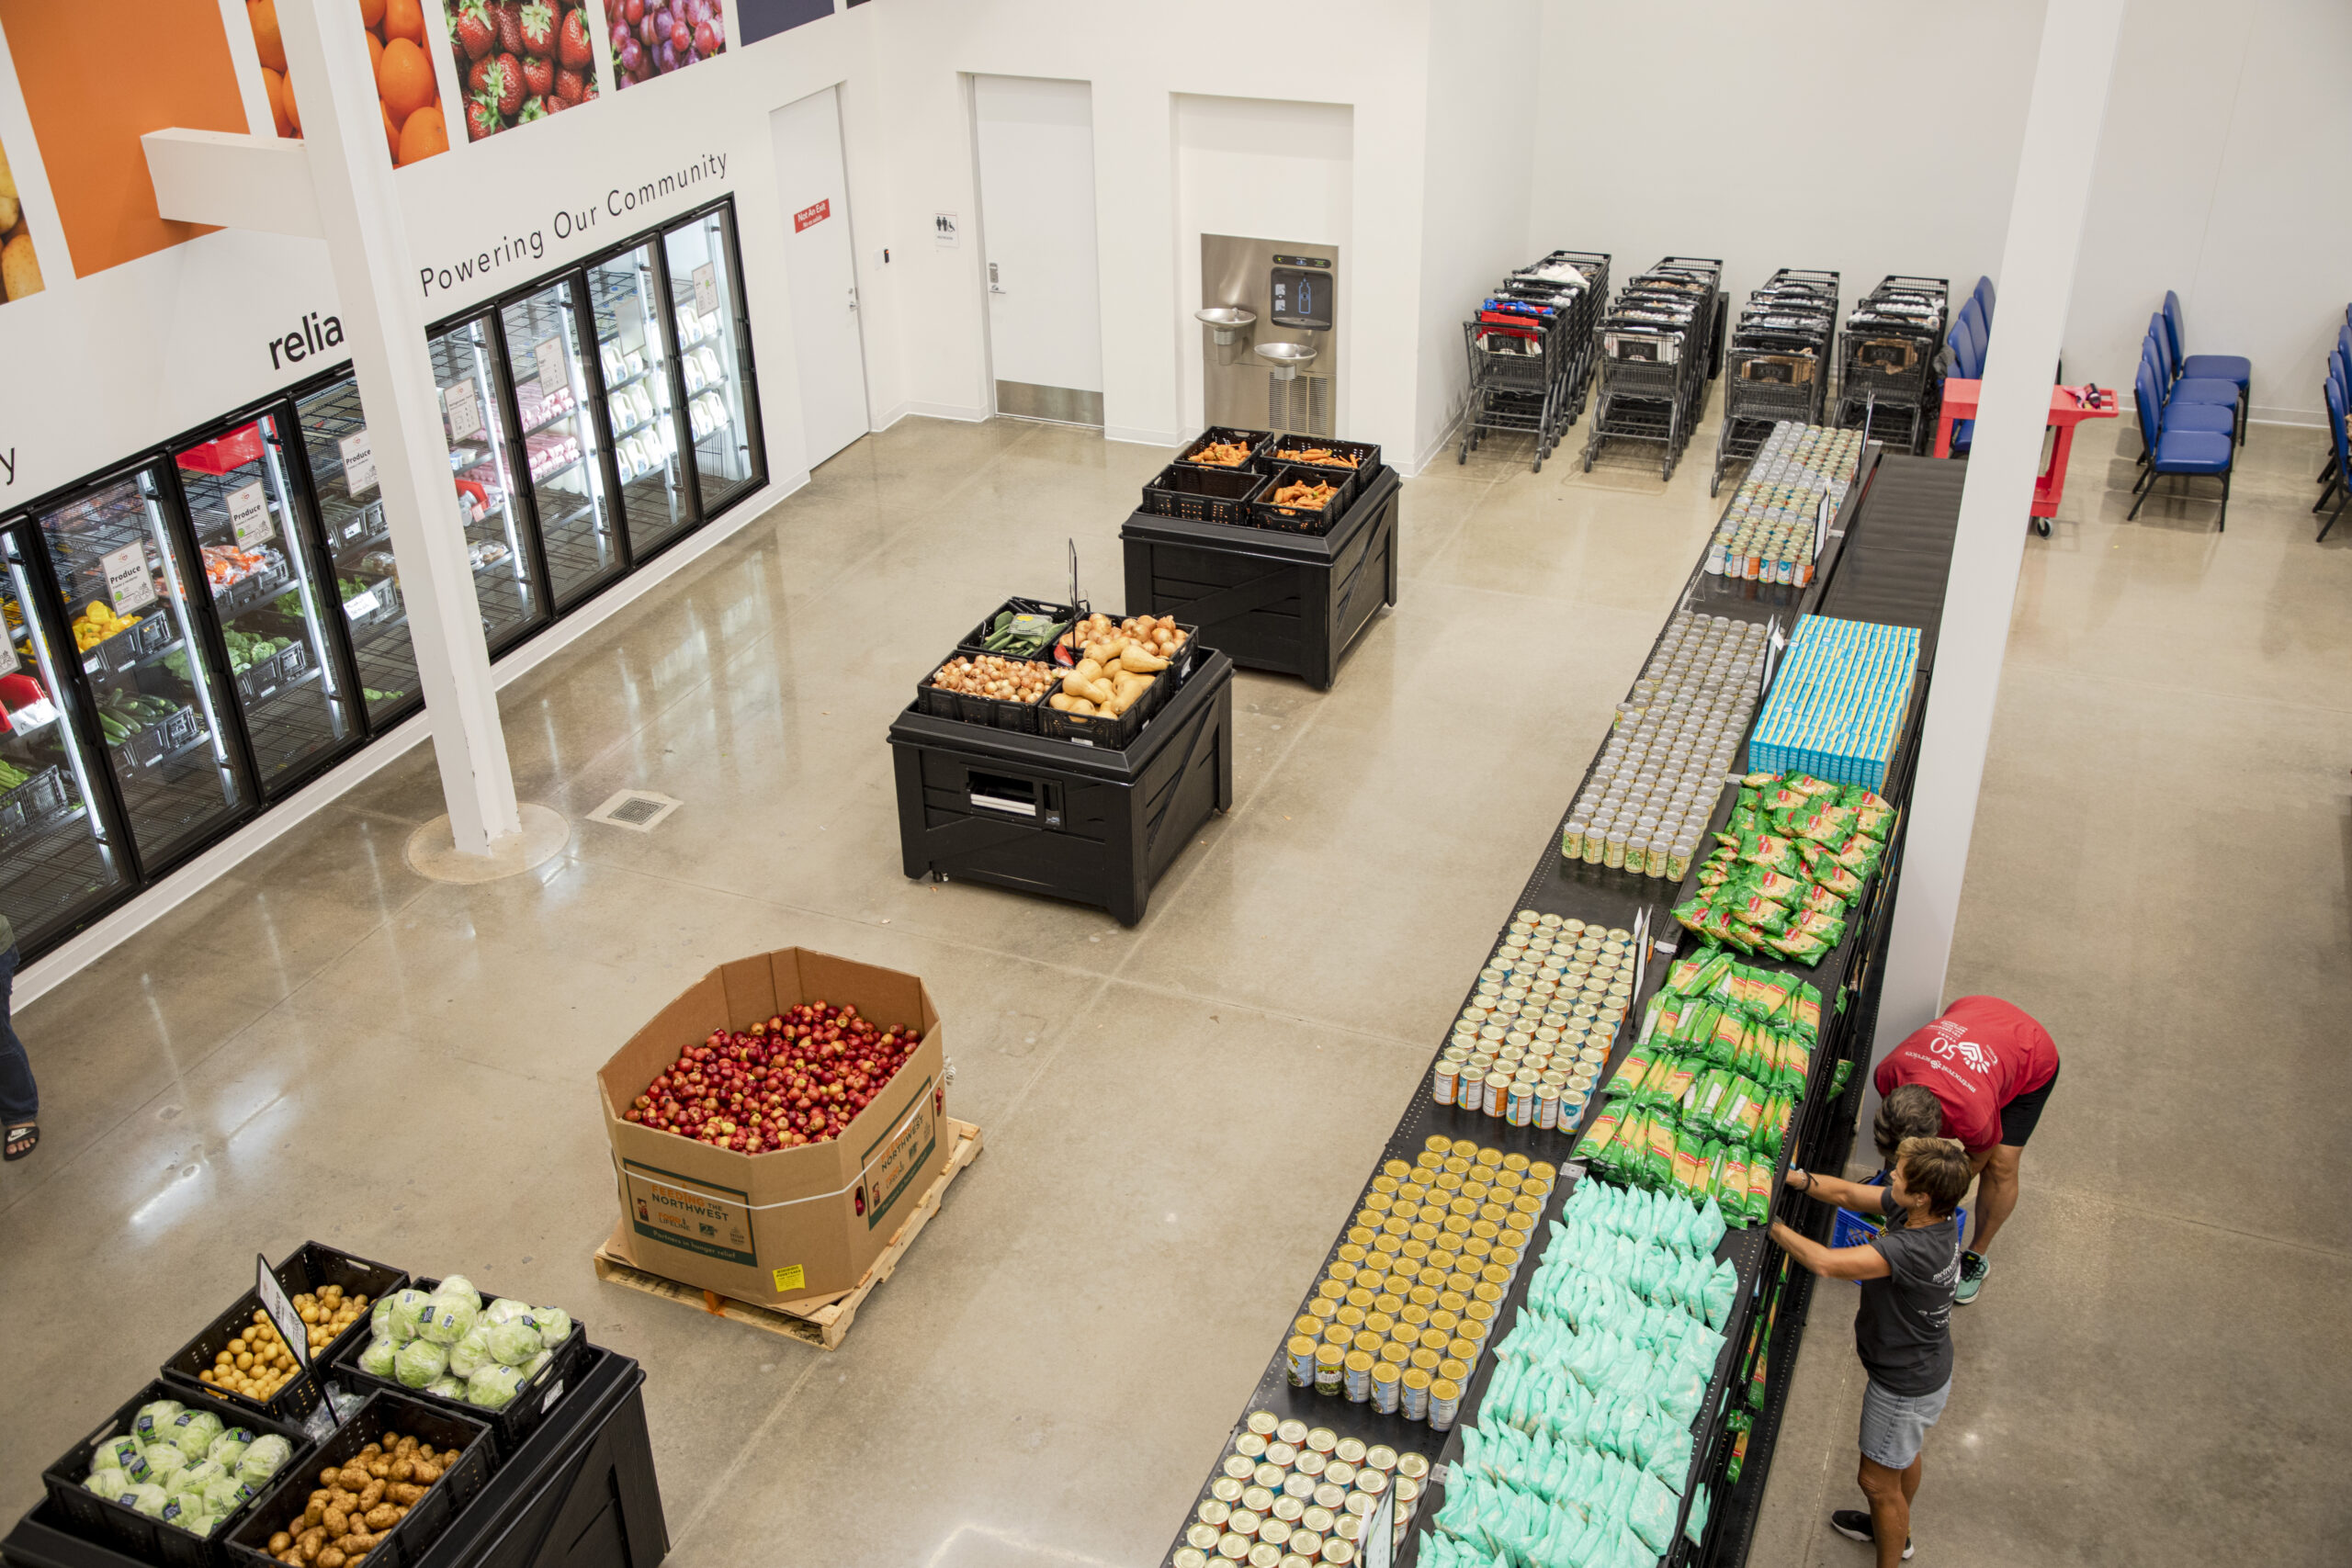 The food bank at the new Metrocrest Services facility is set up like a grocery store. Here, volunteers stock the shelves. The CoServ Charitable Foundation awarded a grant to Metrocrest Services to help purchase food and other needed items.  Photos by NICHOLAS SAKELARIS/CoServ